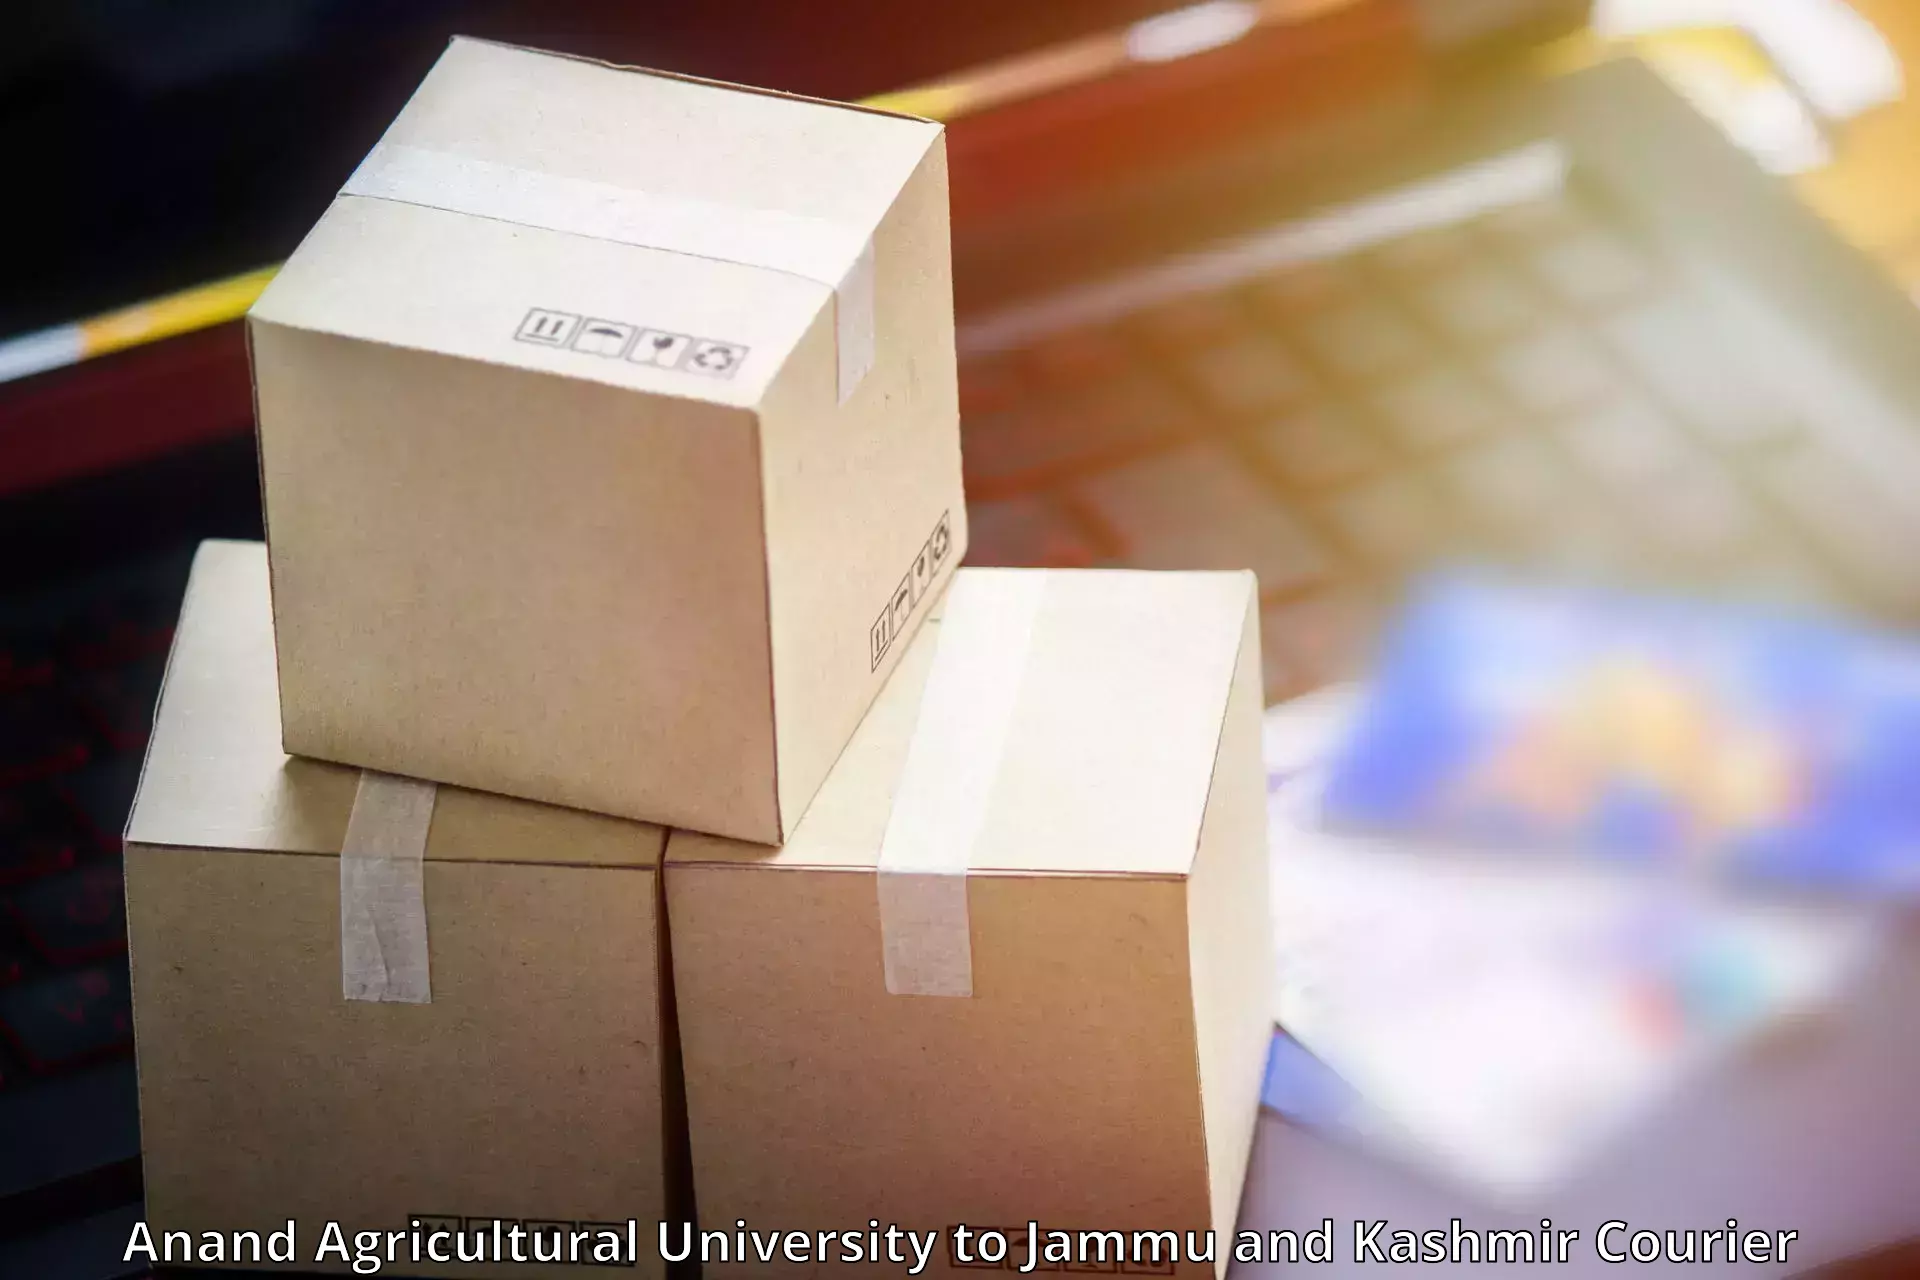 Cargo delivery service Anand Agricultural University to Sunderbani